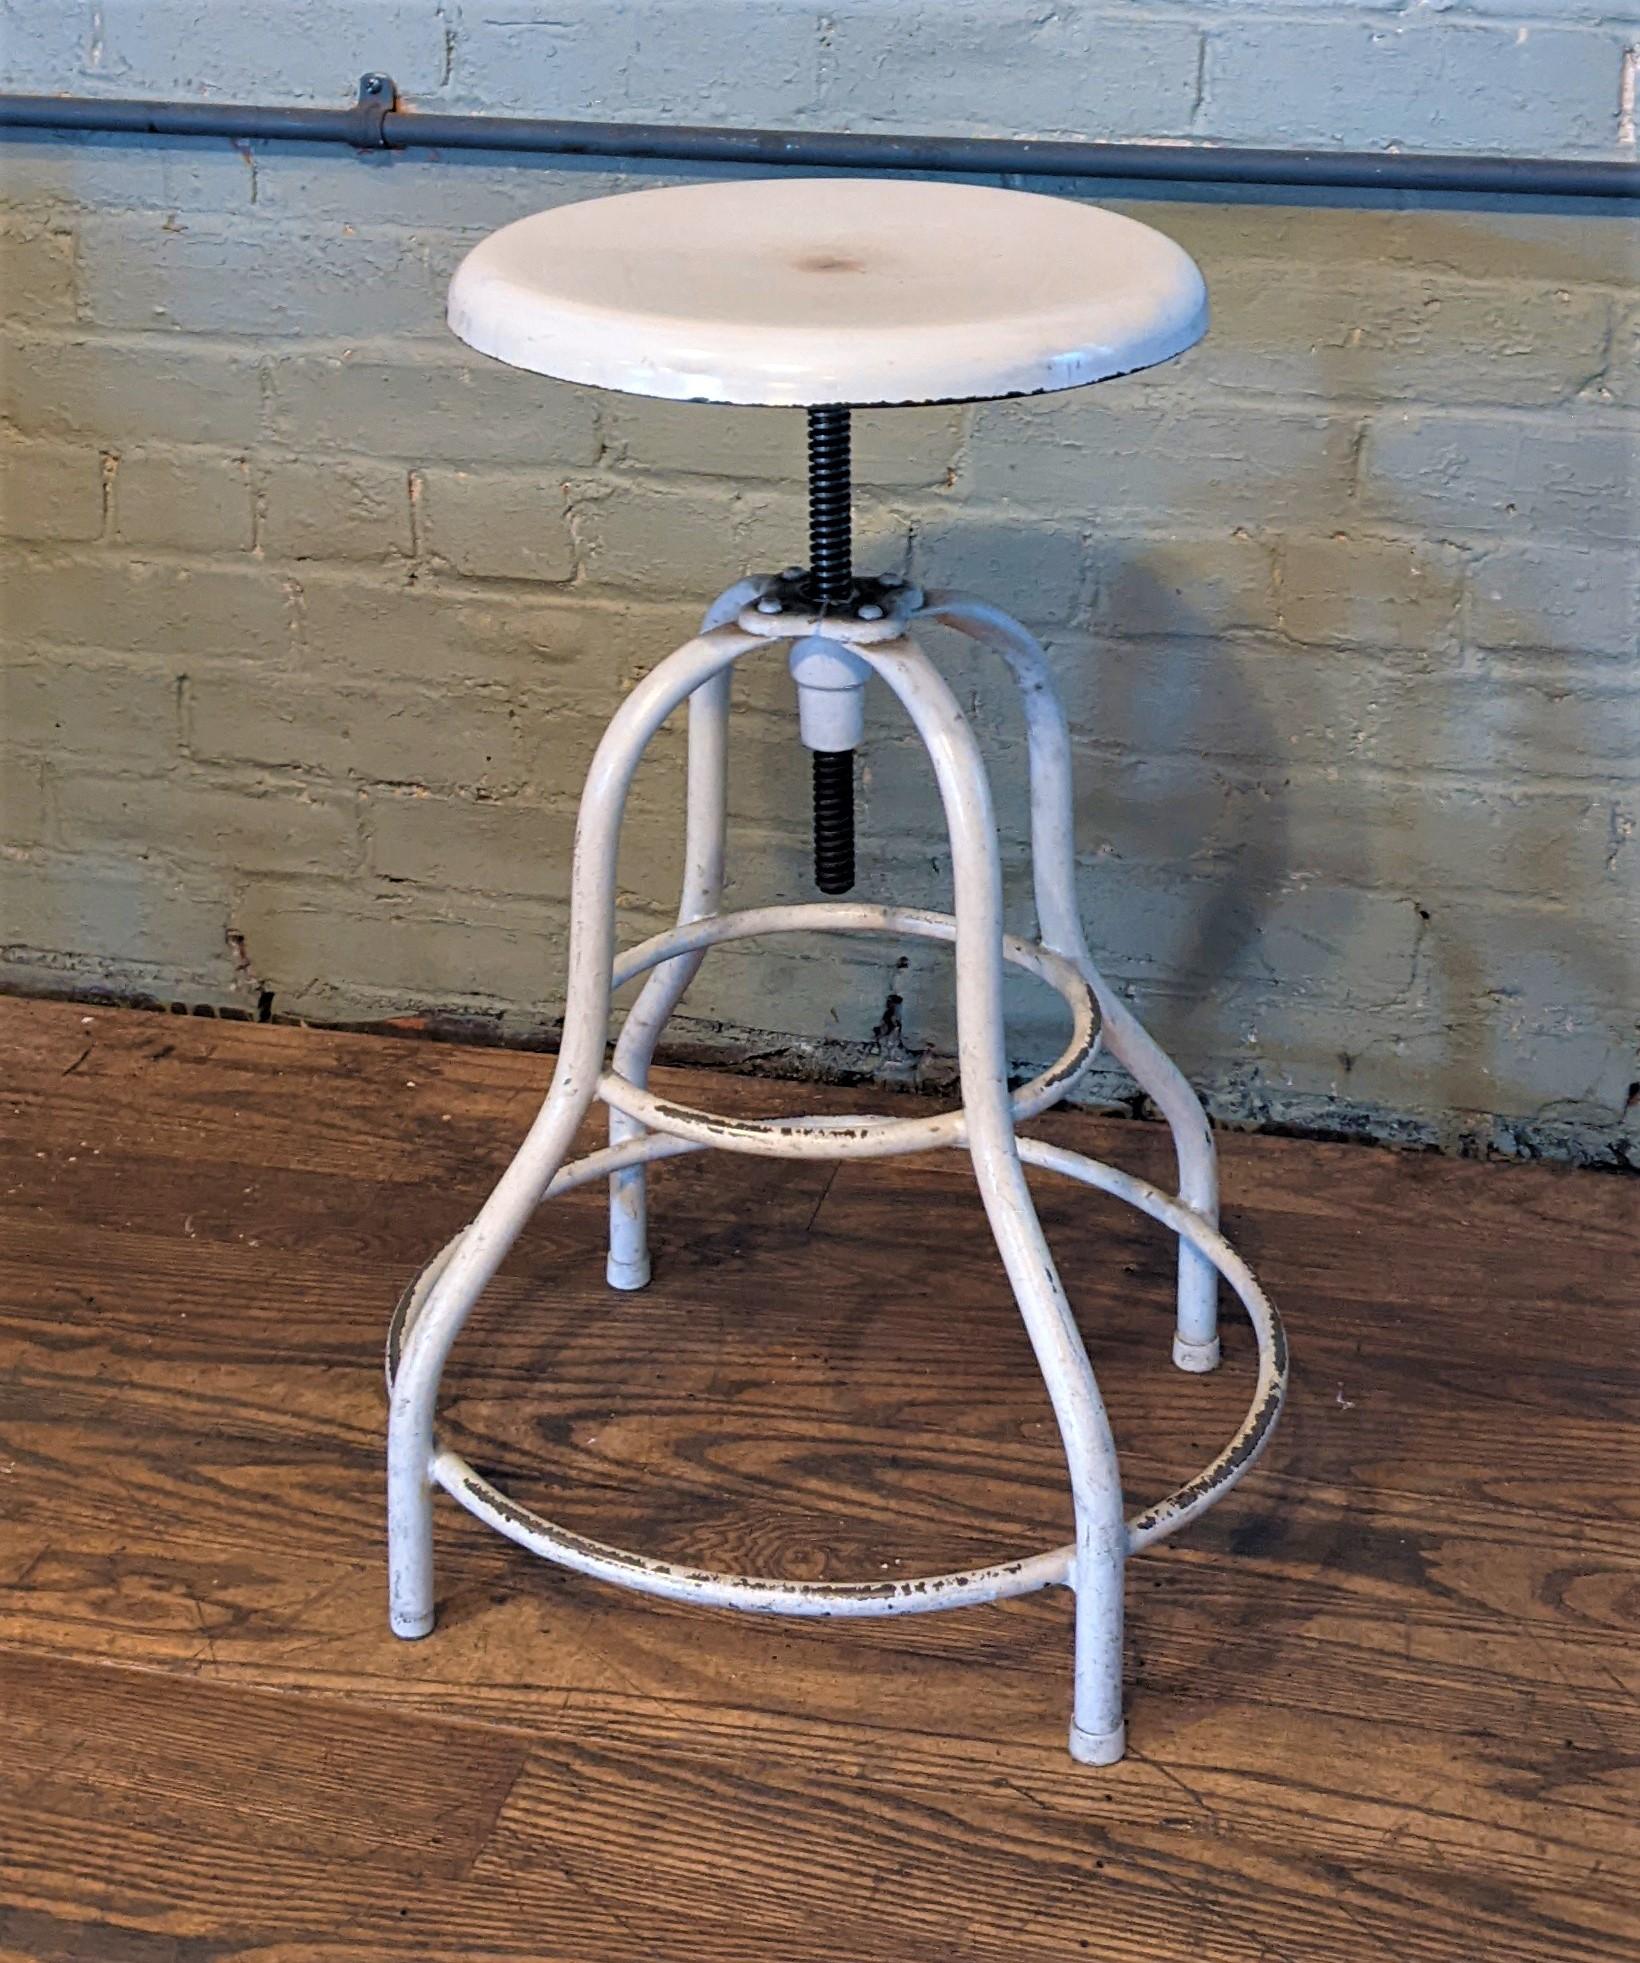 Vintage medical stool

Overall Dimensions: 16 1/2